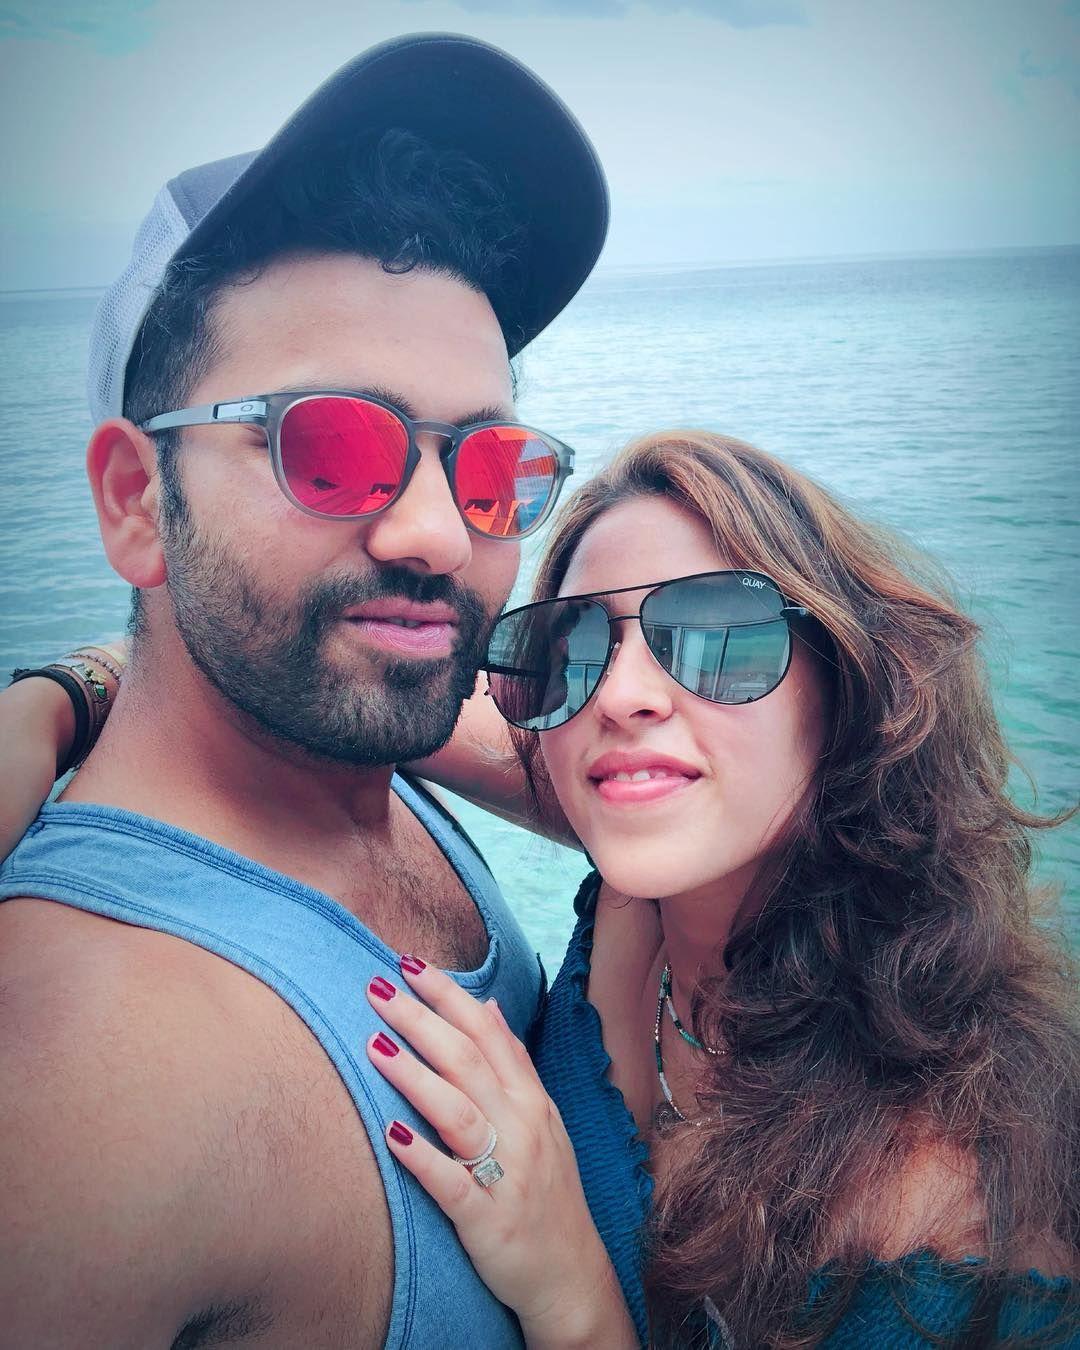 Rohit Sharma Personal Photos with Wife Ritika Sajdeh and Family